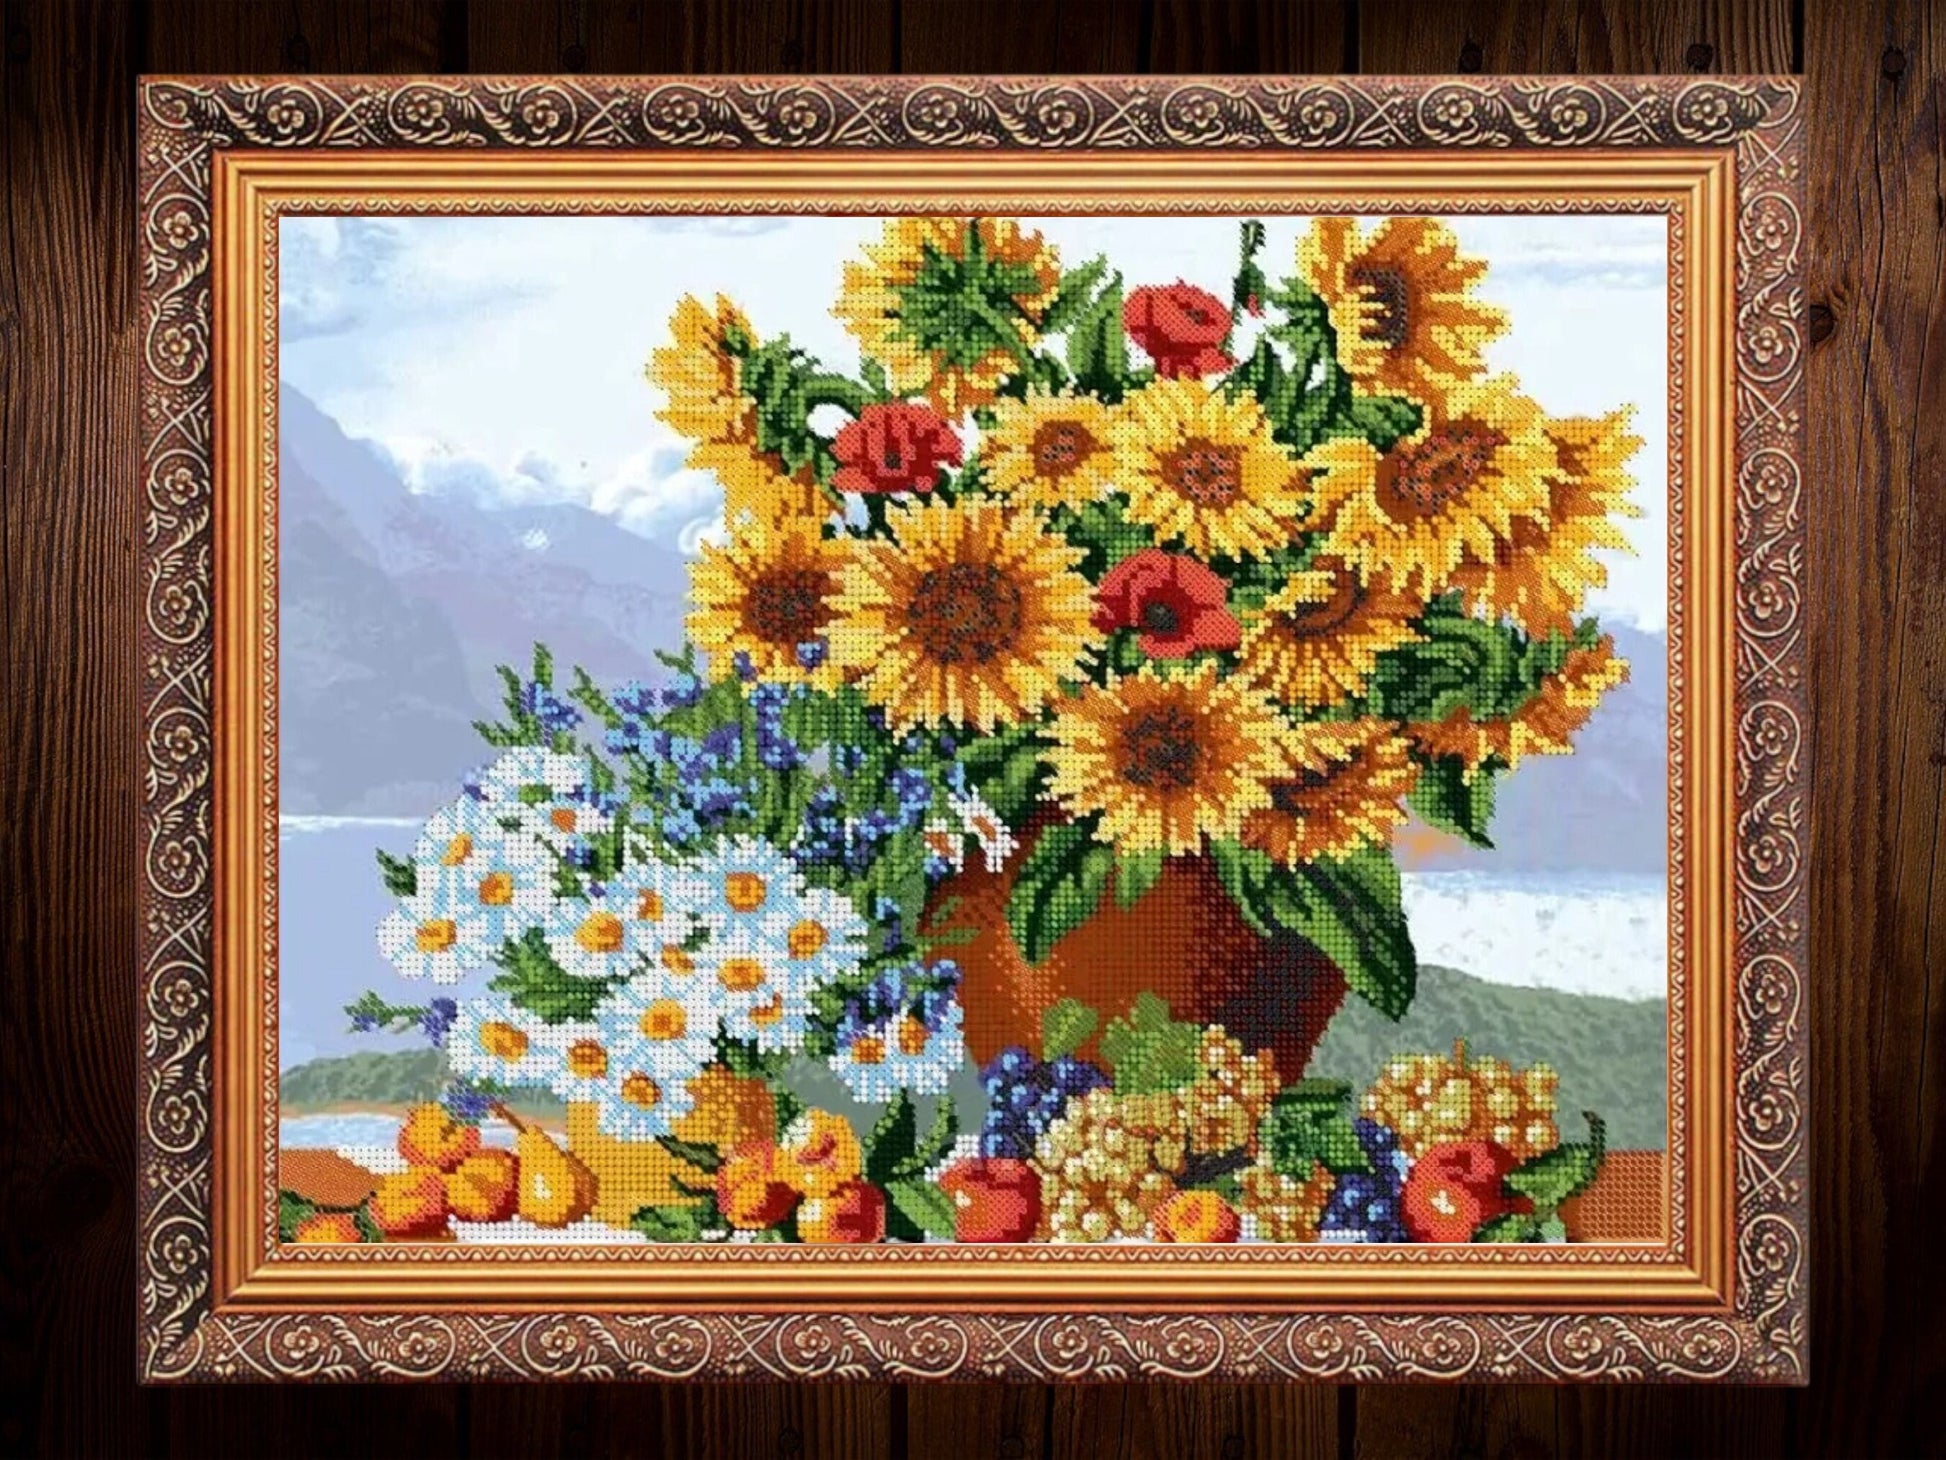 Sunflowers and Daisies DIY Bead Embroidery Kit - Create Your Own Floral Masterpiece! Size: 15-11in (38-29cm) - VadymShop